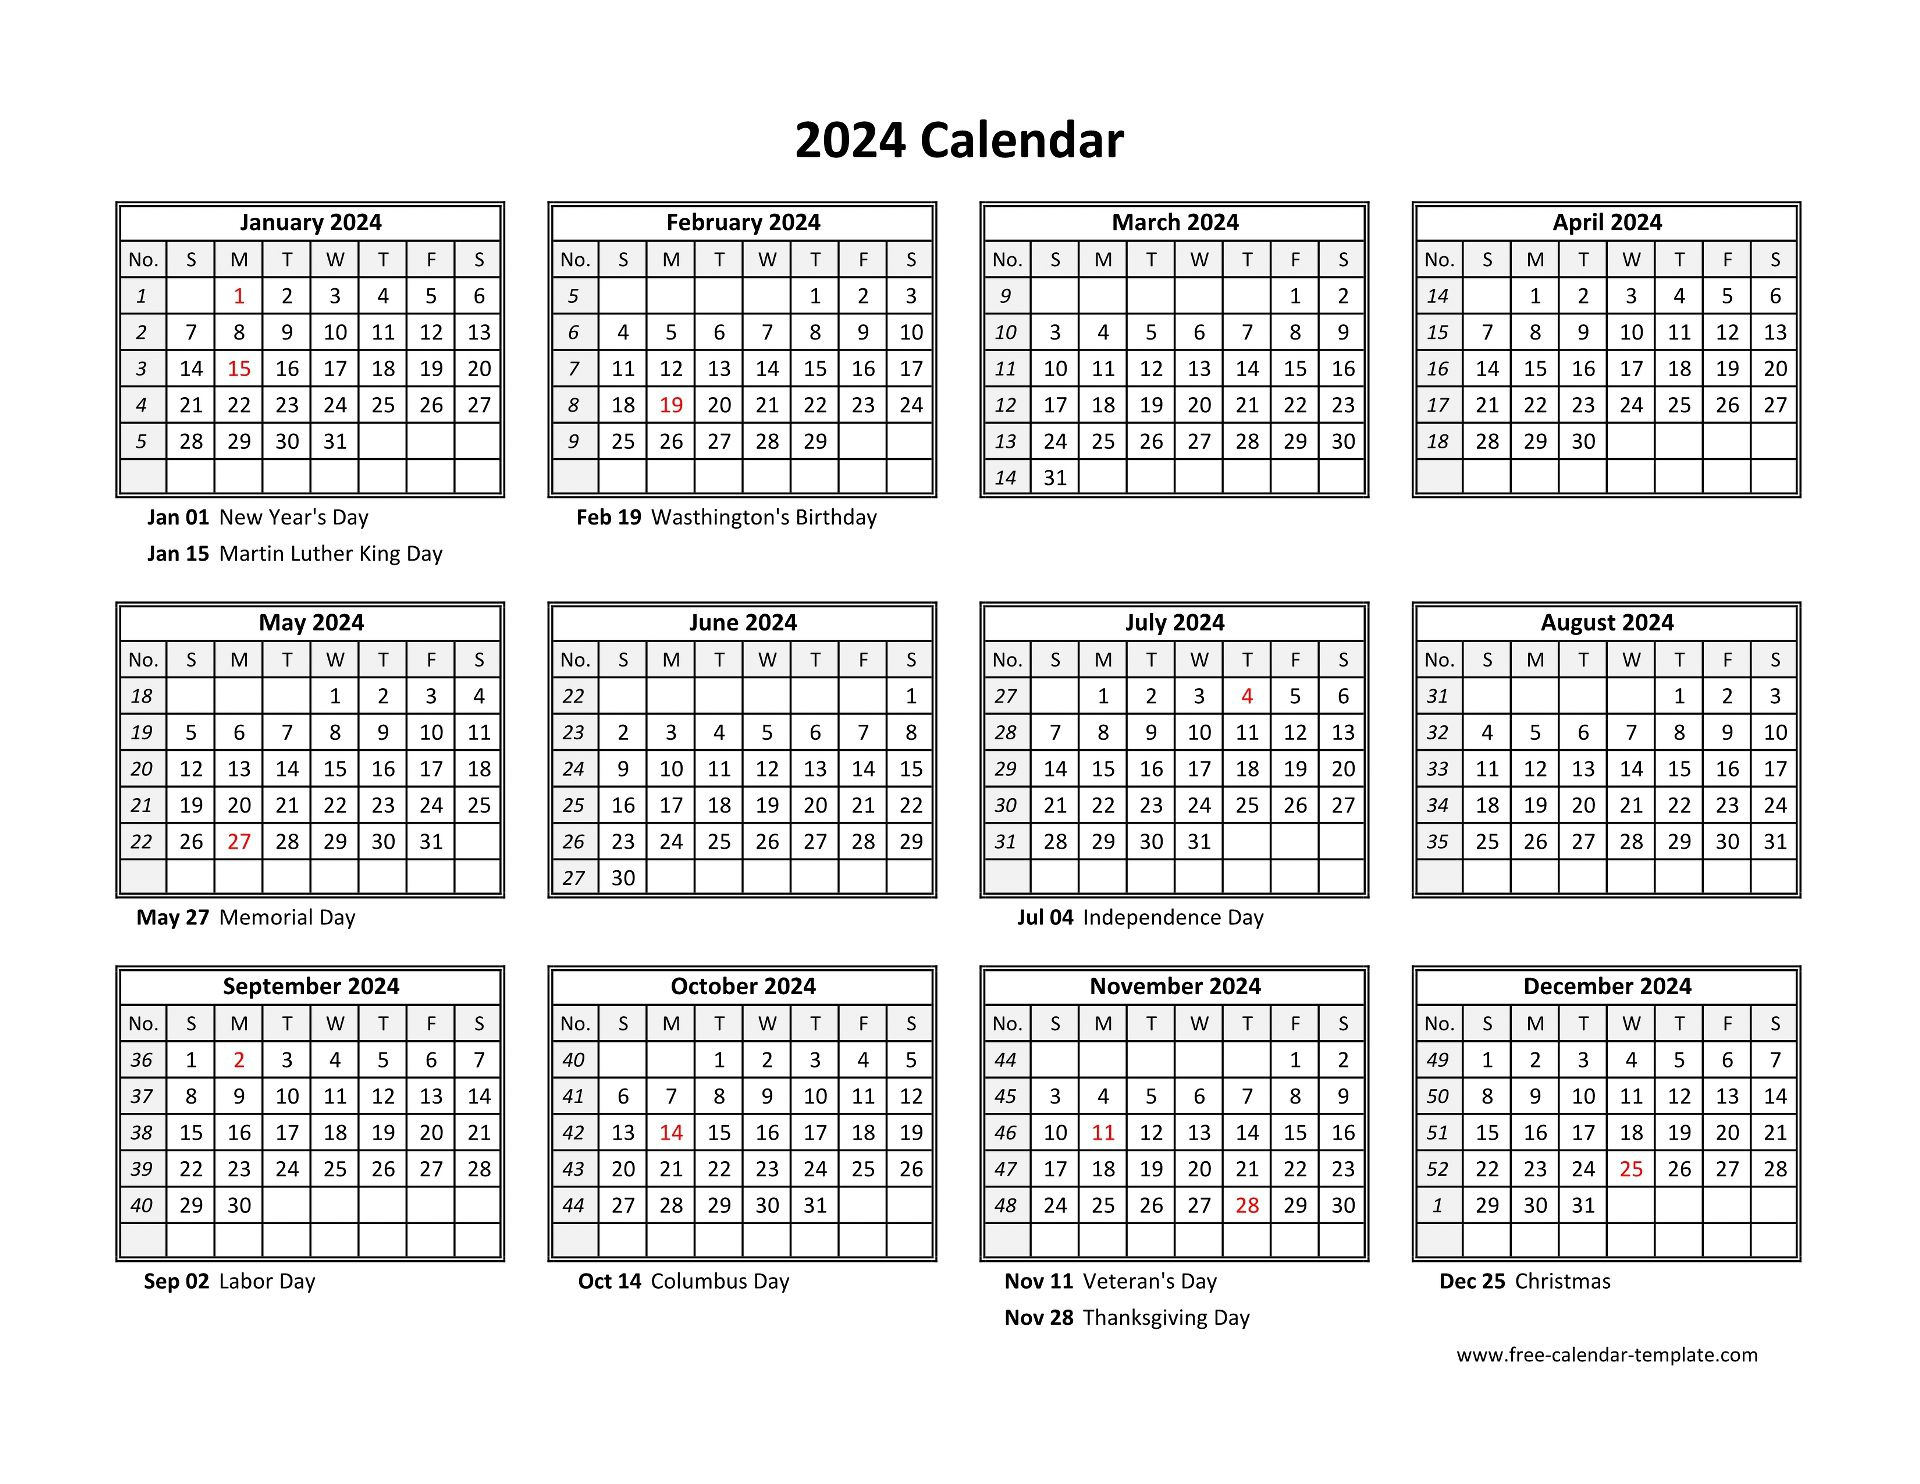 Yearly Calendar 2024 Printable With Federal Holidays | Free | Yearly Calendar 2024